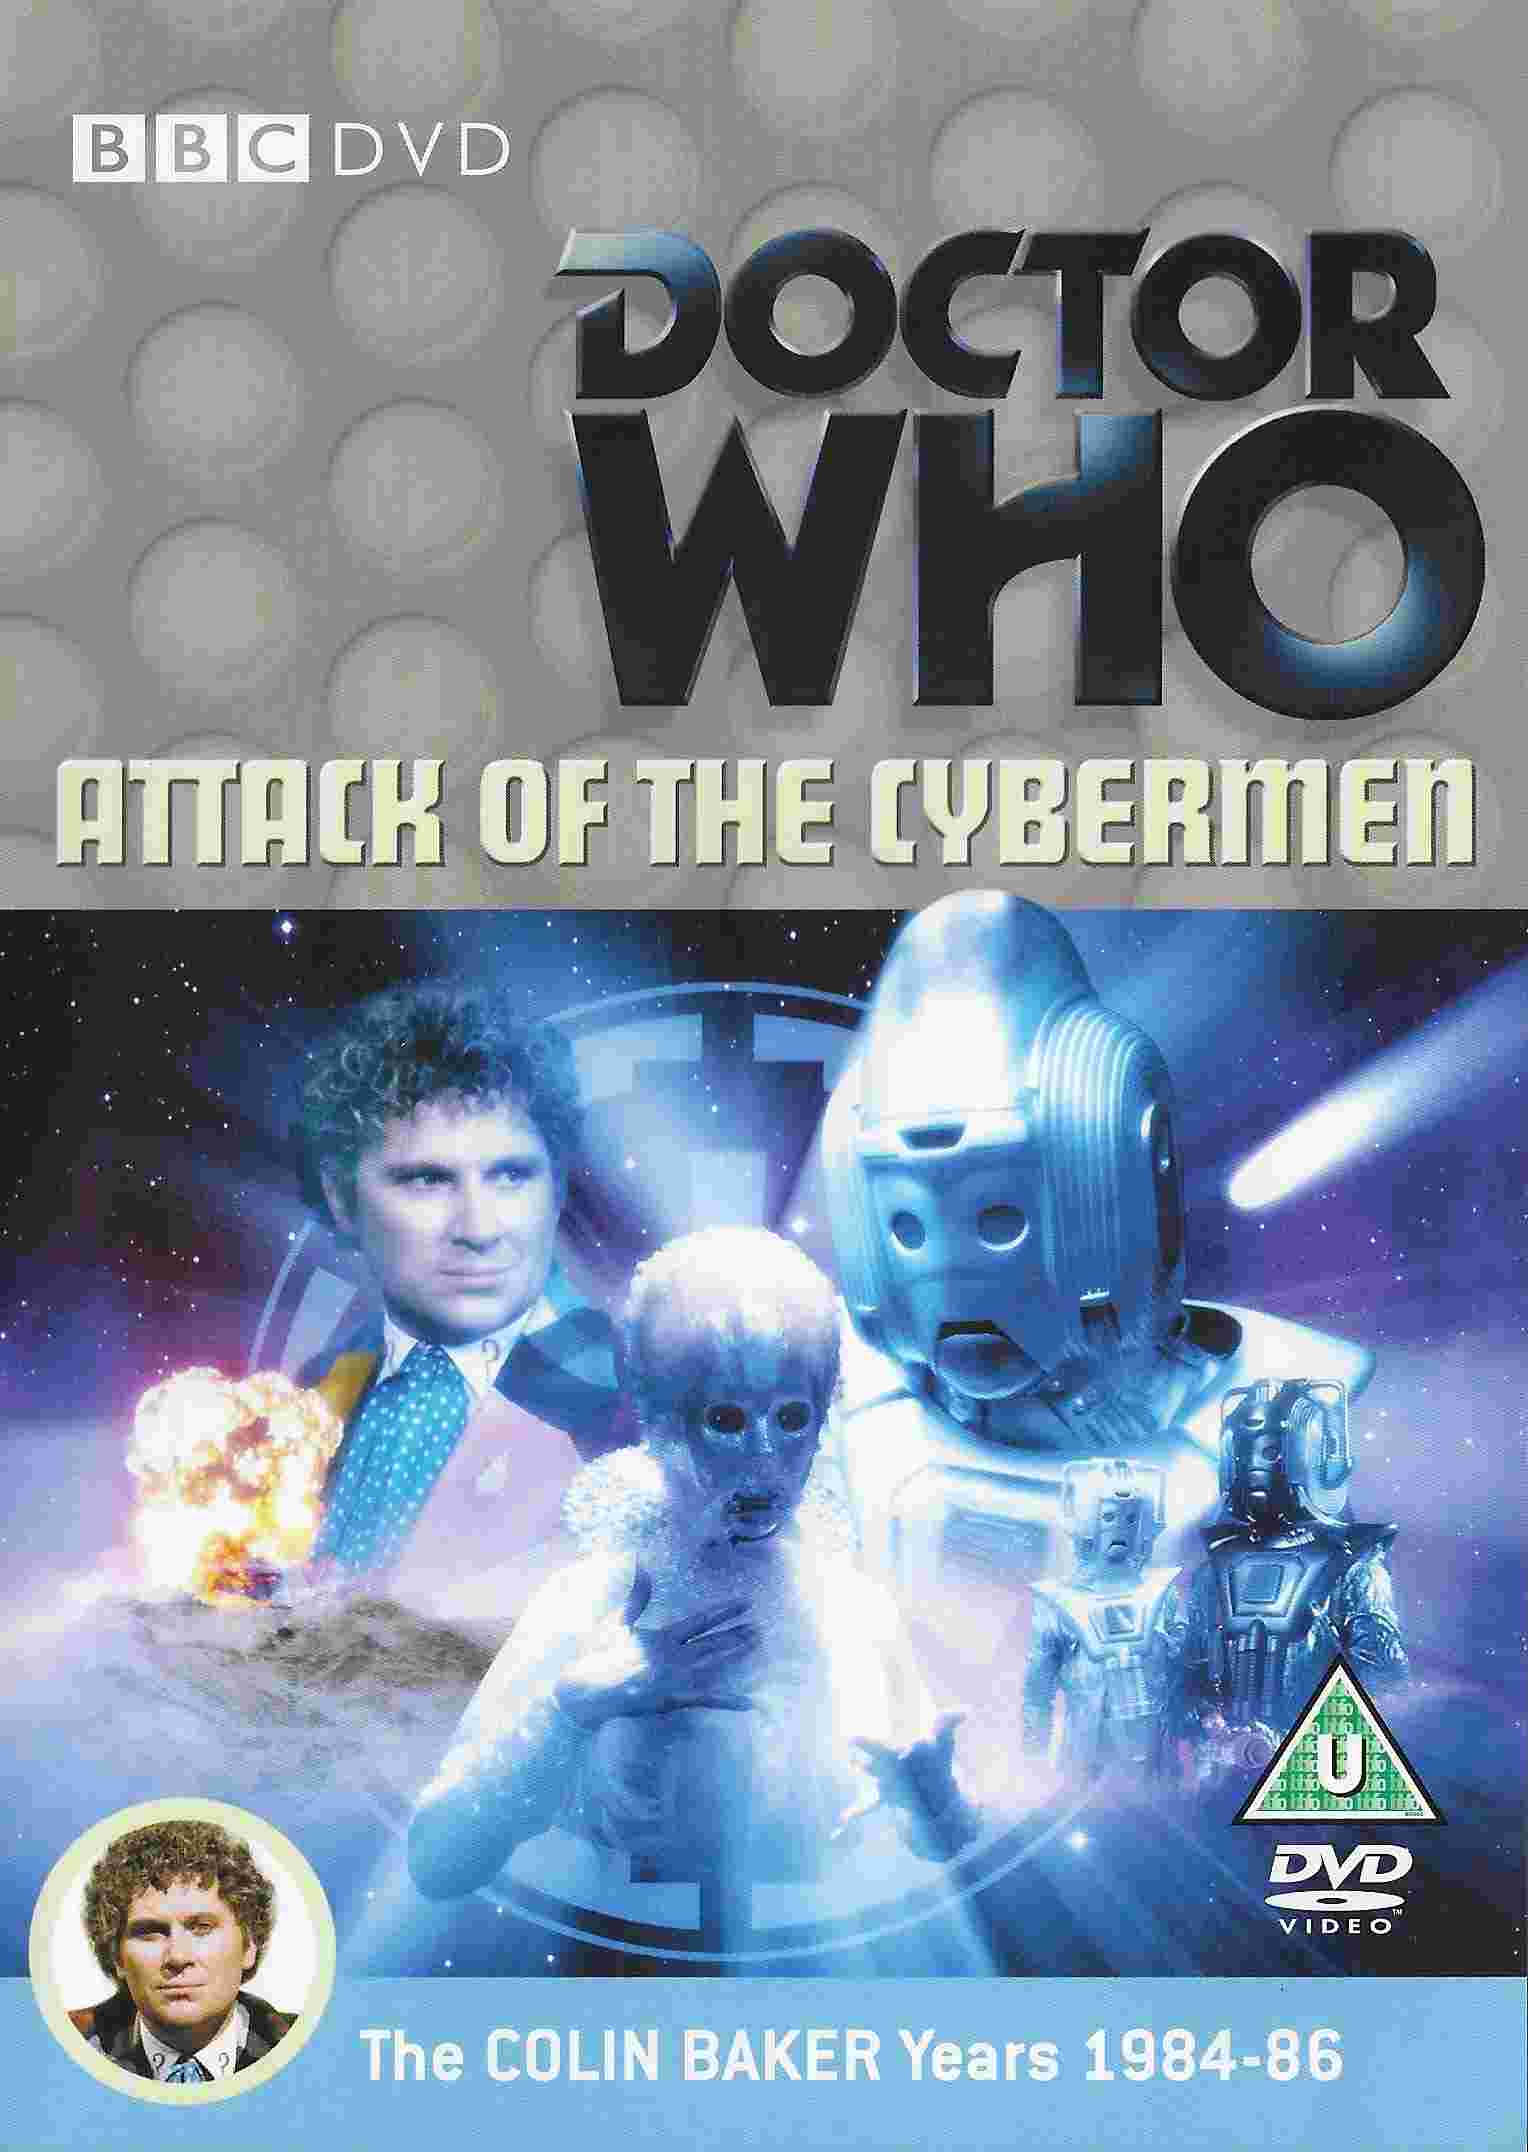 Picture of BBCDVD 2436 Doctor Who - Attack of the Cybermen by artist Paula Moore from the BBC dvds - Records and Tapes library